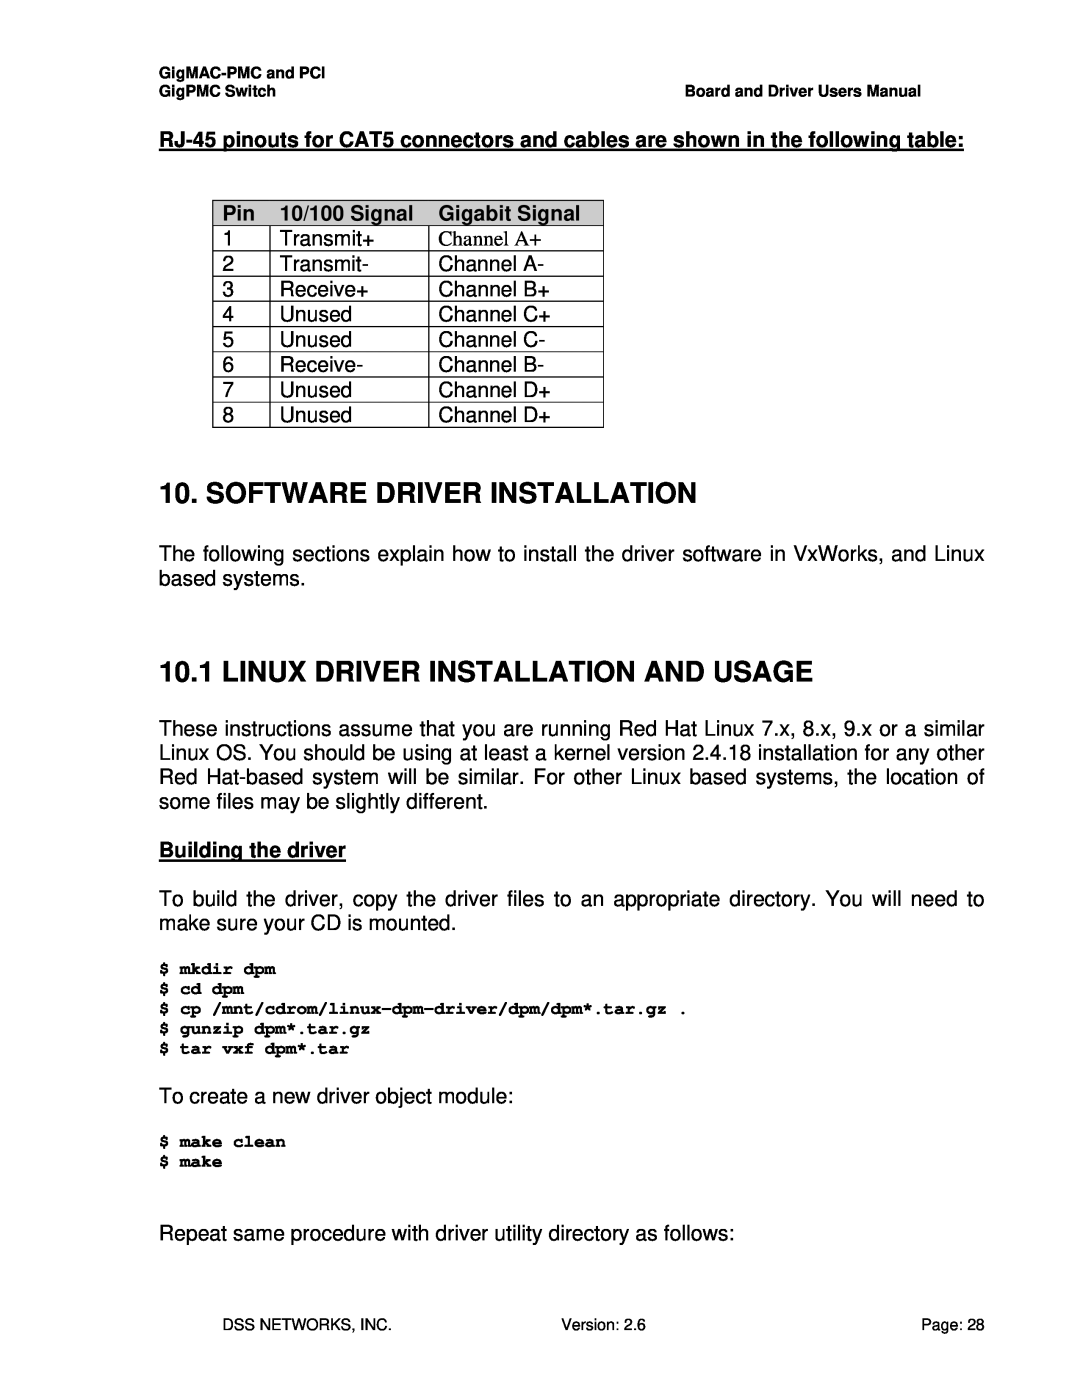 Intel PCI-X user manual Software Driver Installation, Linux Driver Installation And Usage, 10/100 Signal, Gigabit Signal 